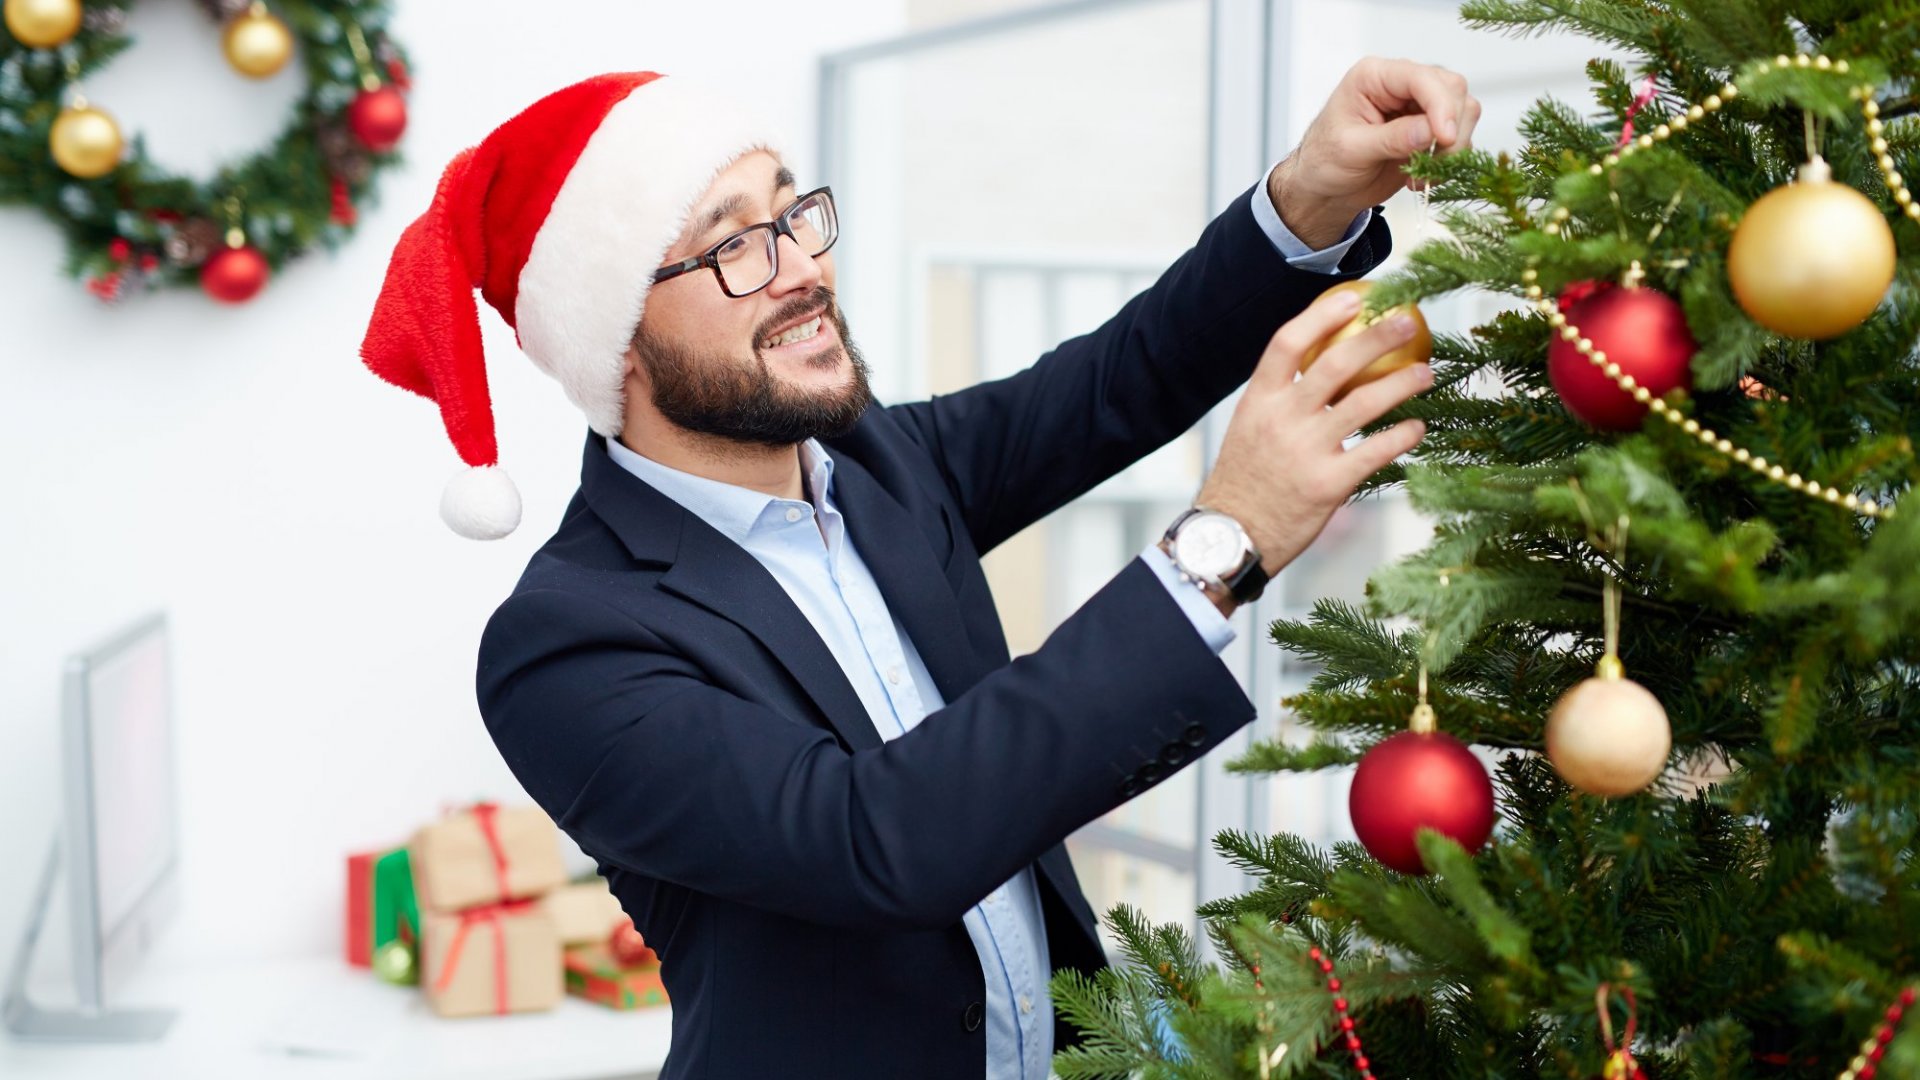 November Too Early For Christmas Decorations? - Confused.Com